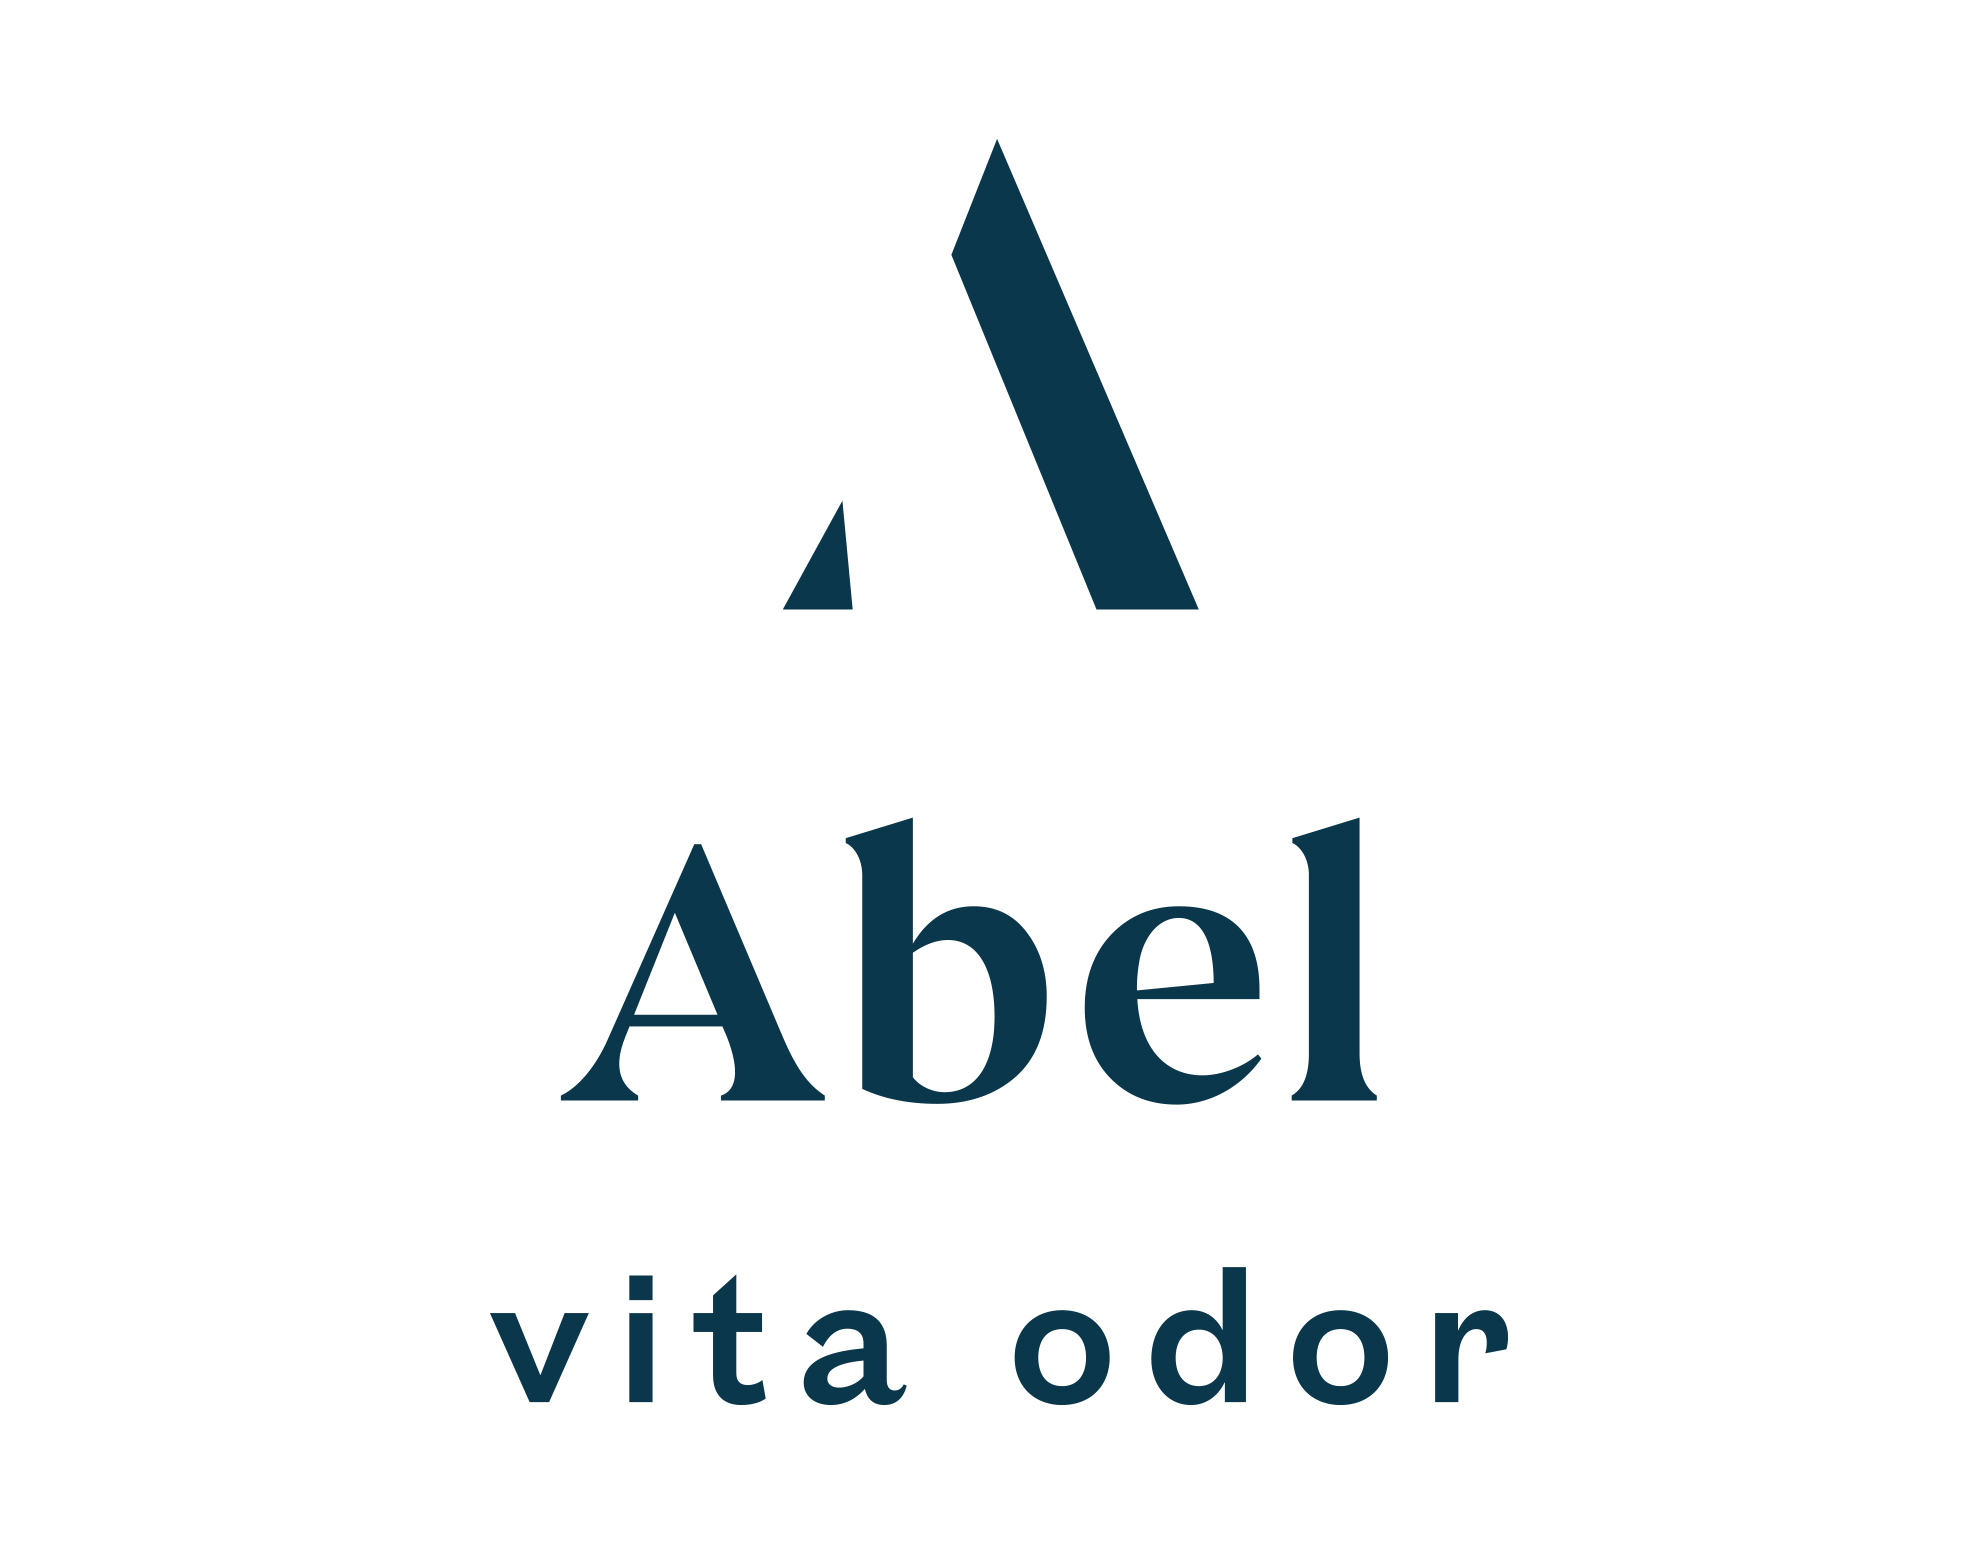 Logo of the organic and natural perfume brand Abel